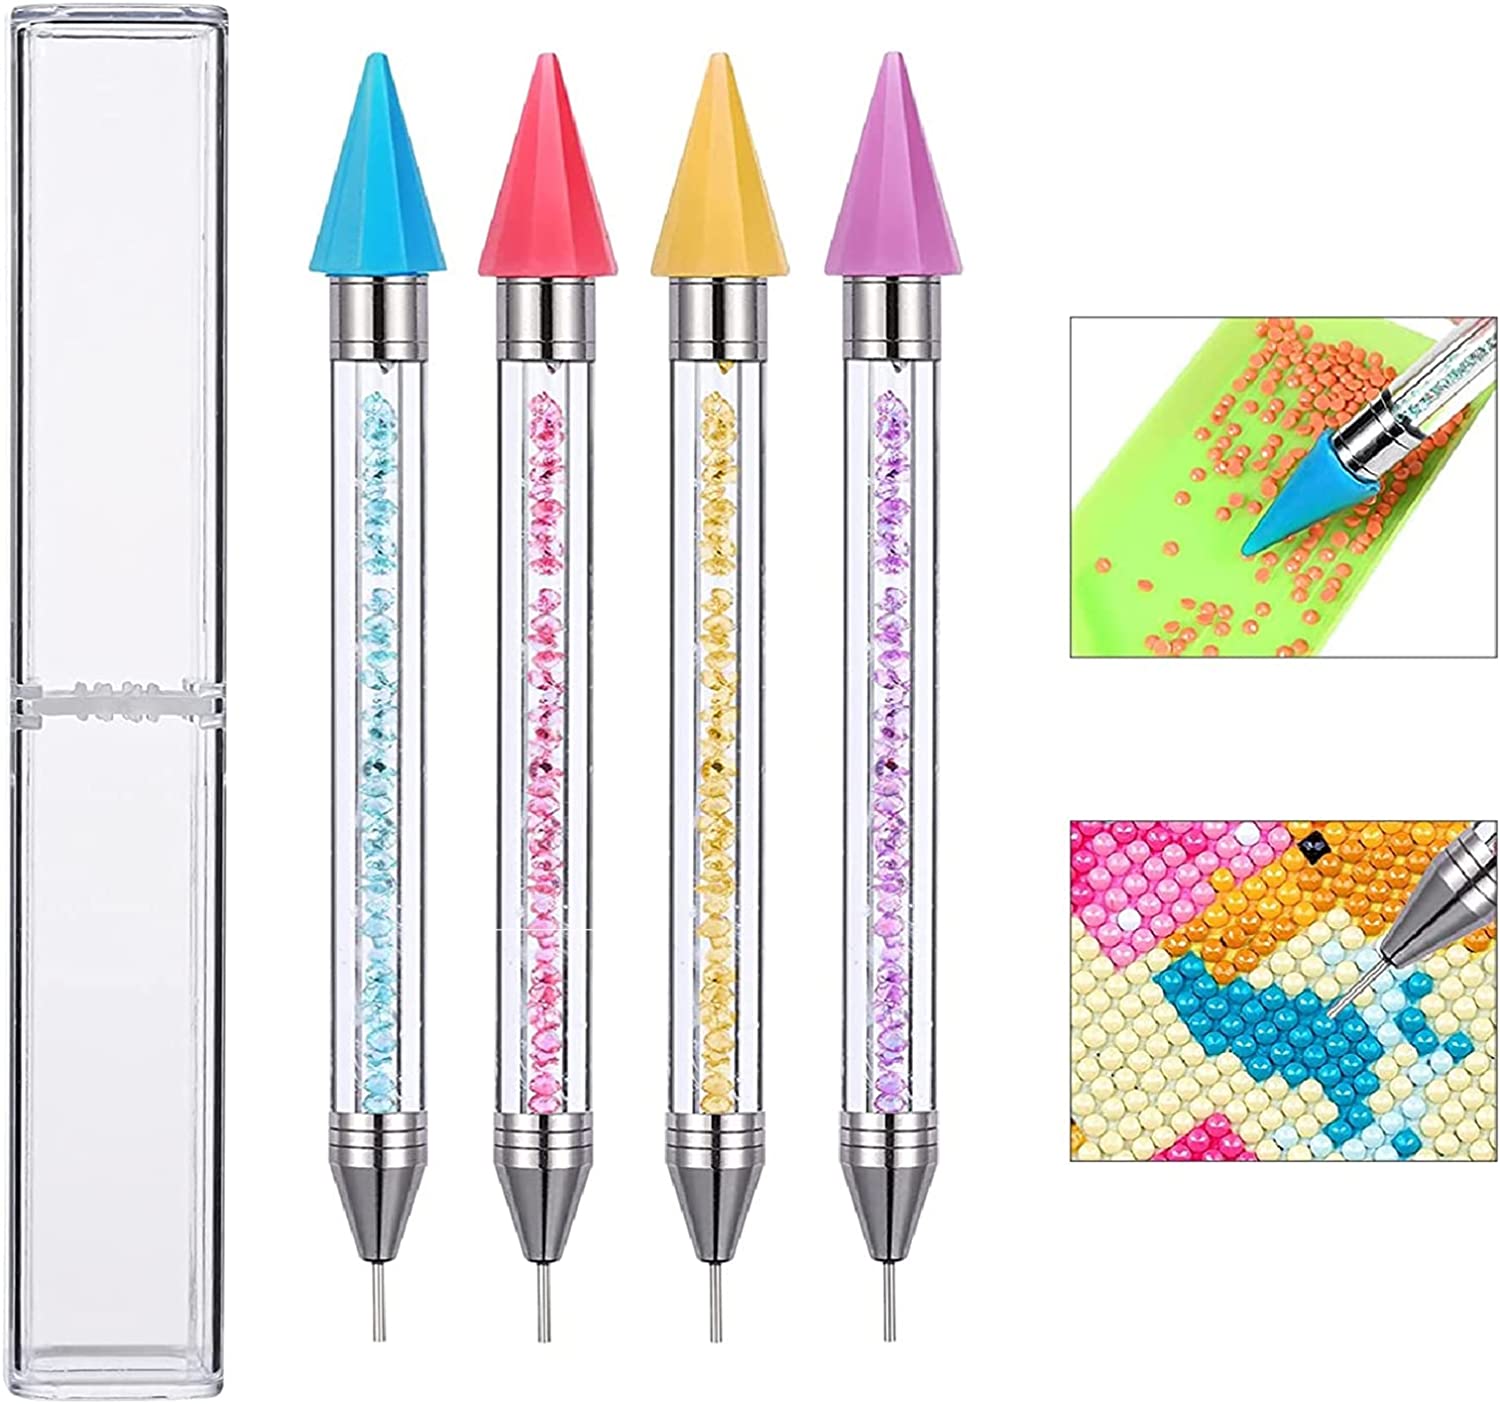 Calsoling 4 Pieces No Wax Needed Diamond Painting Tools Self-Stick Drill Pens, Double Heads No Clay Specialty Design with Diamonds Accessories for 5D DIY Painting Crafts Cross-Stitch